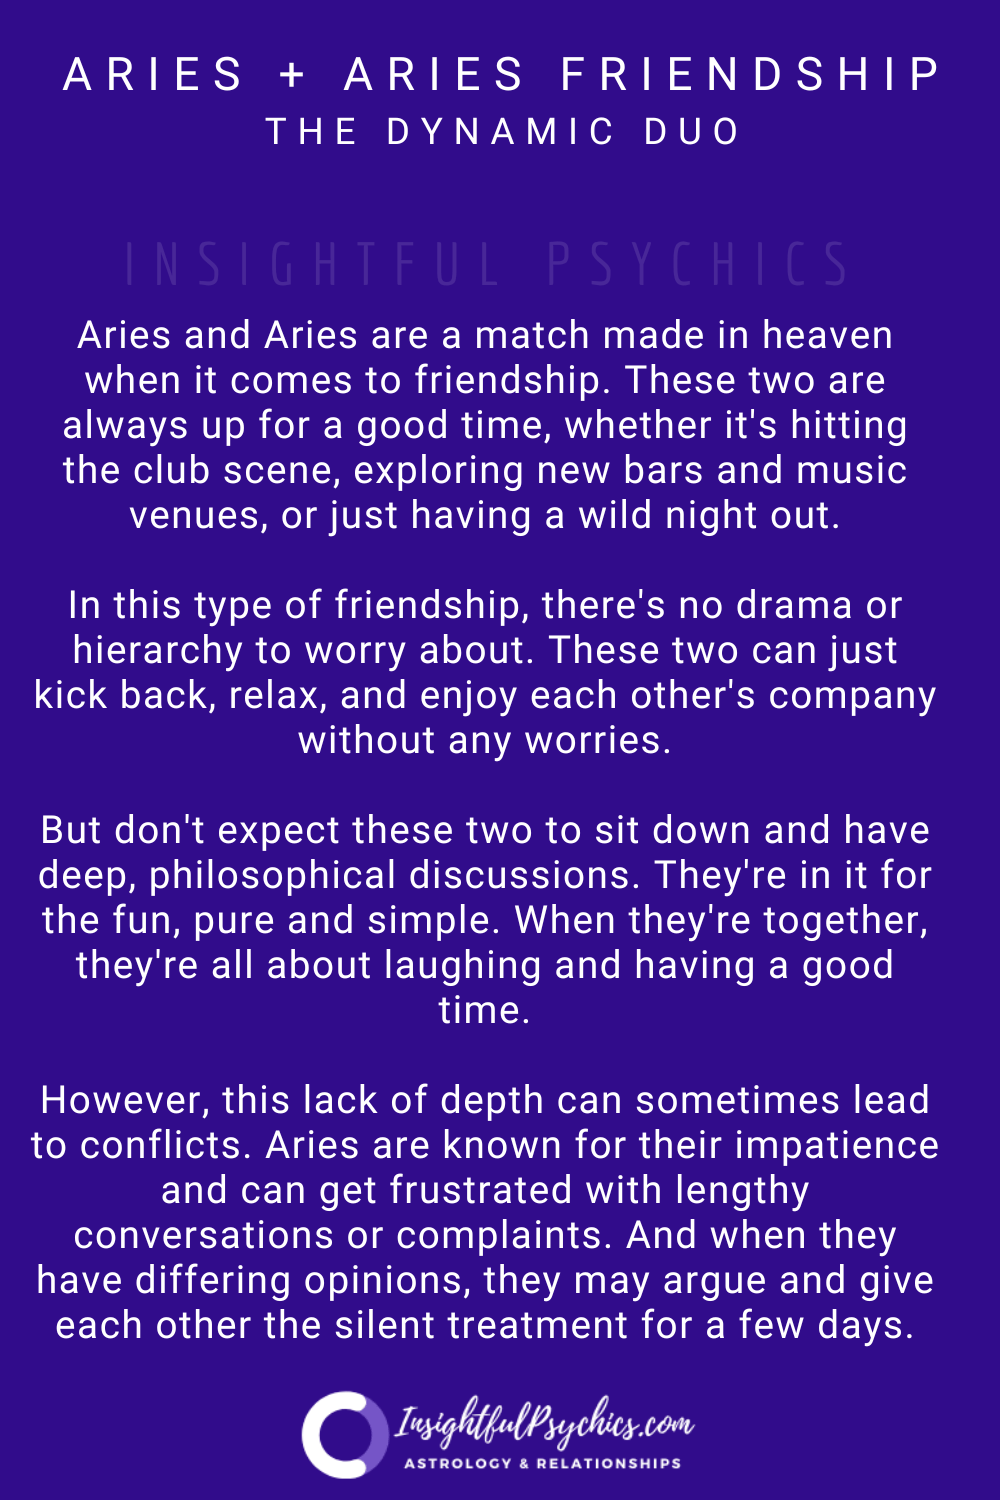 aries and aries friendship